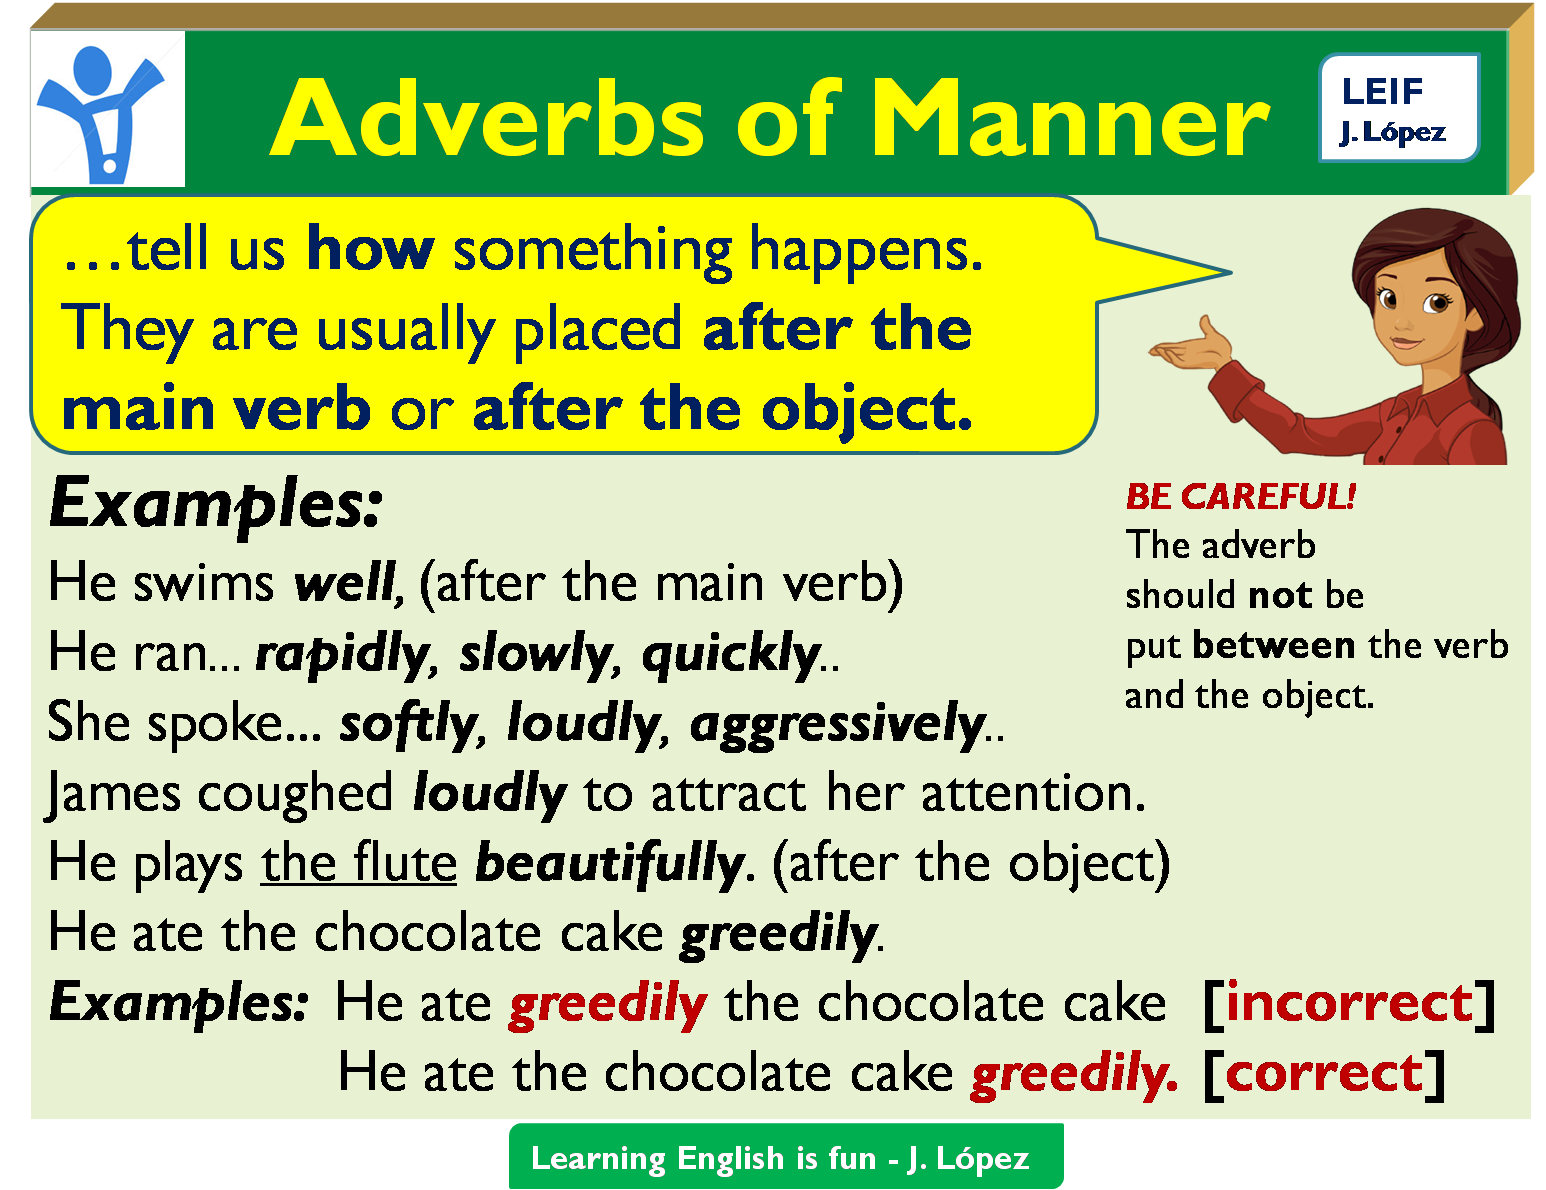 Adverb pdf. Adverbs of manner. Adverbs of manner правило. Adjectives adverbs of manner. Adverbs of manner таблица.